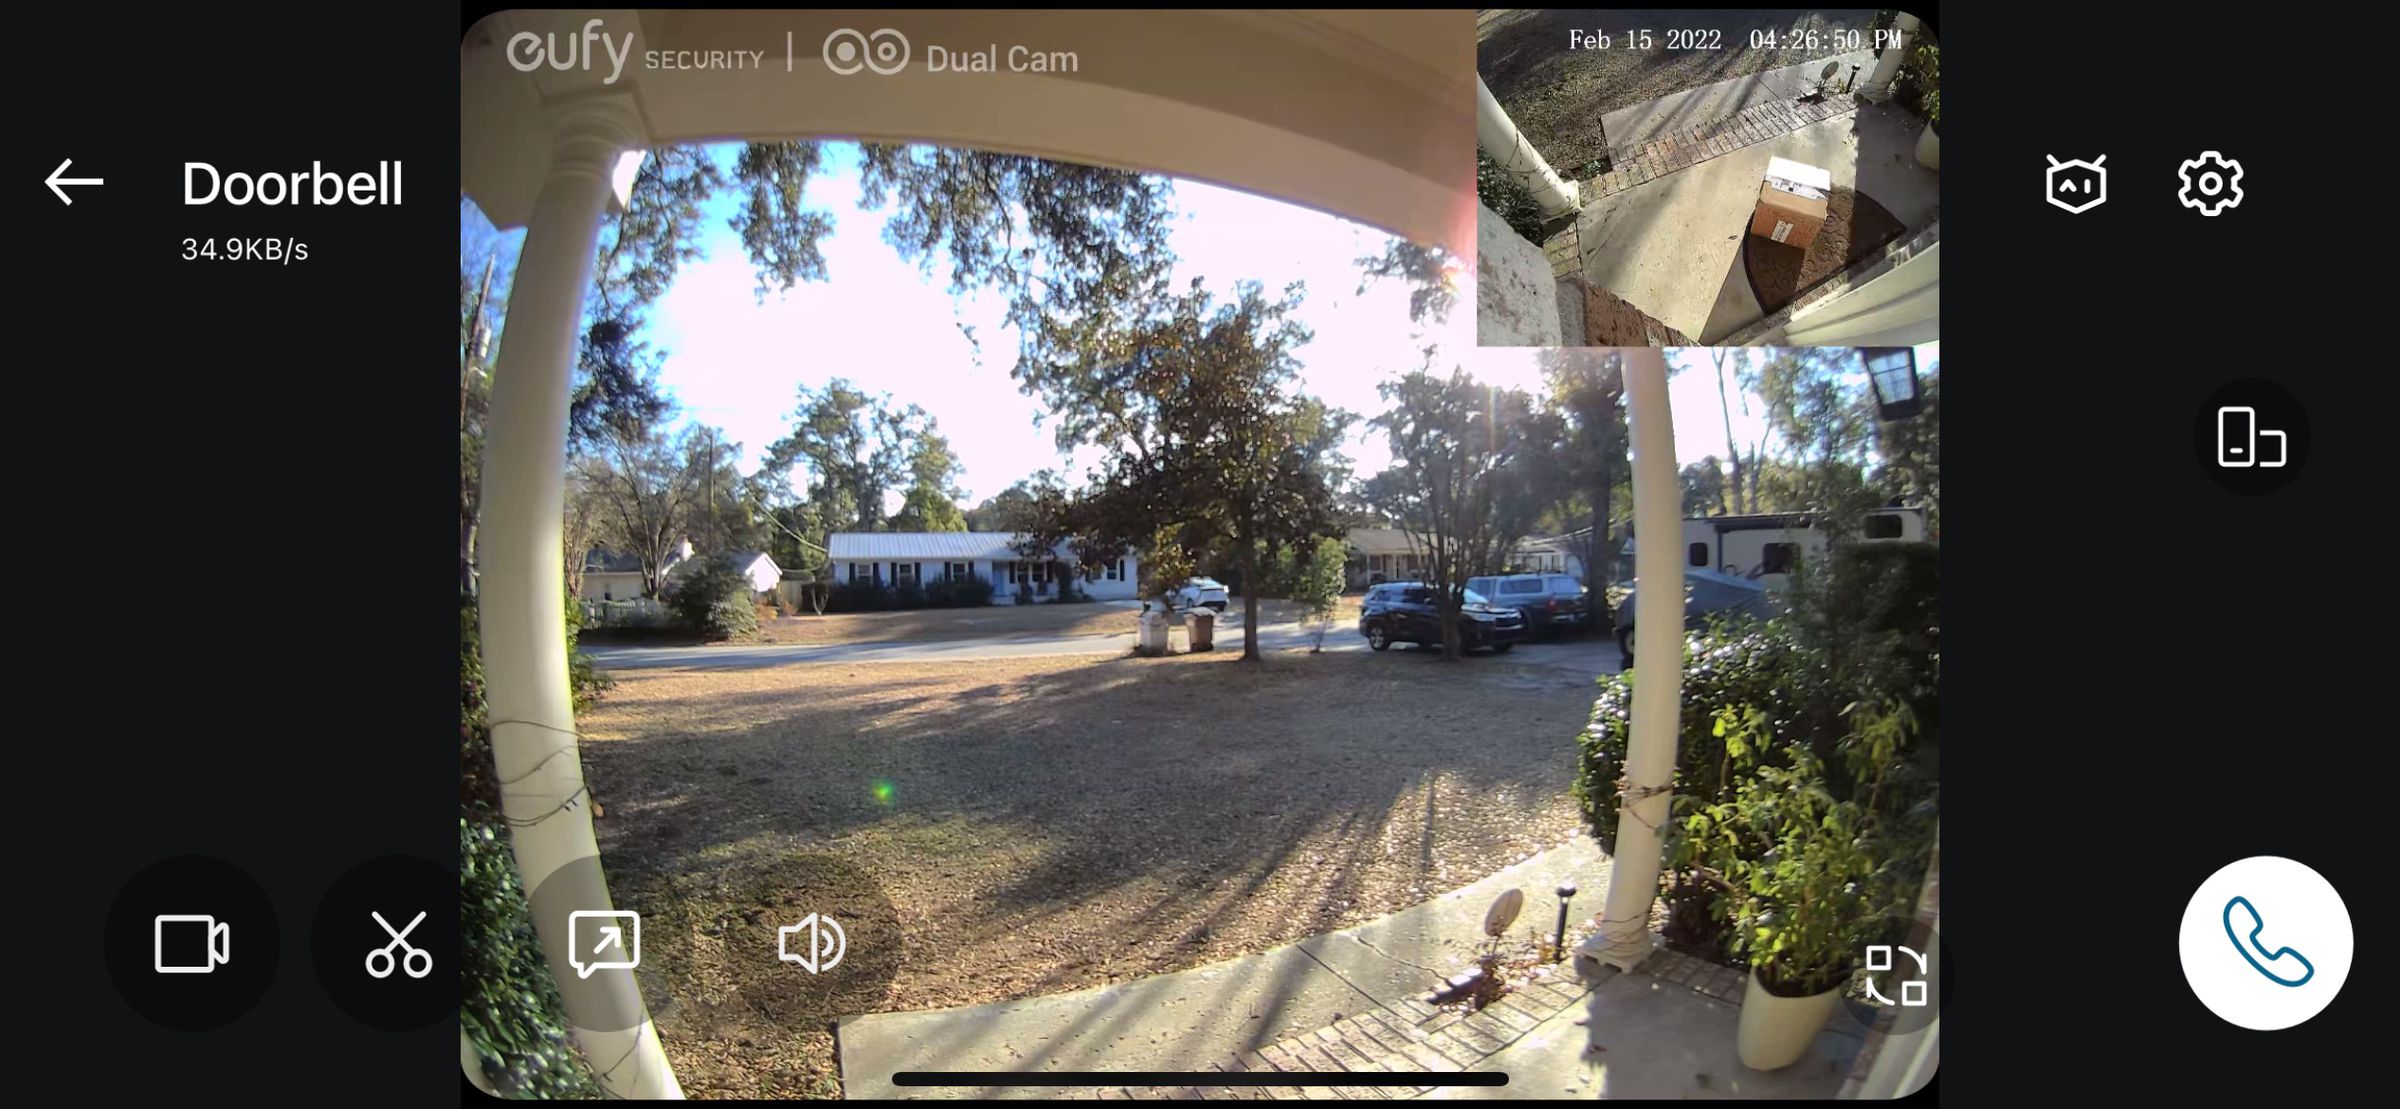 There are two options for viewing the cameras: picture-in-picture, as shown, or stacked on top with a black bar running between the two feeds.